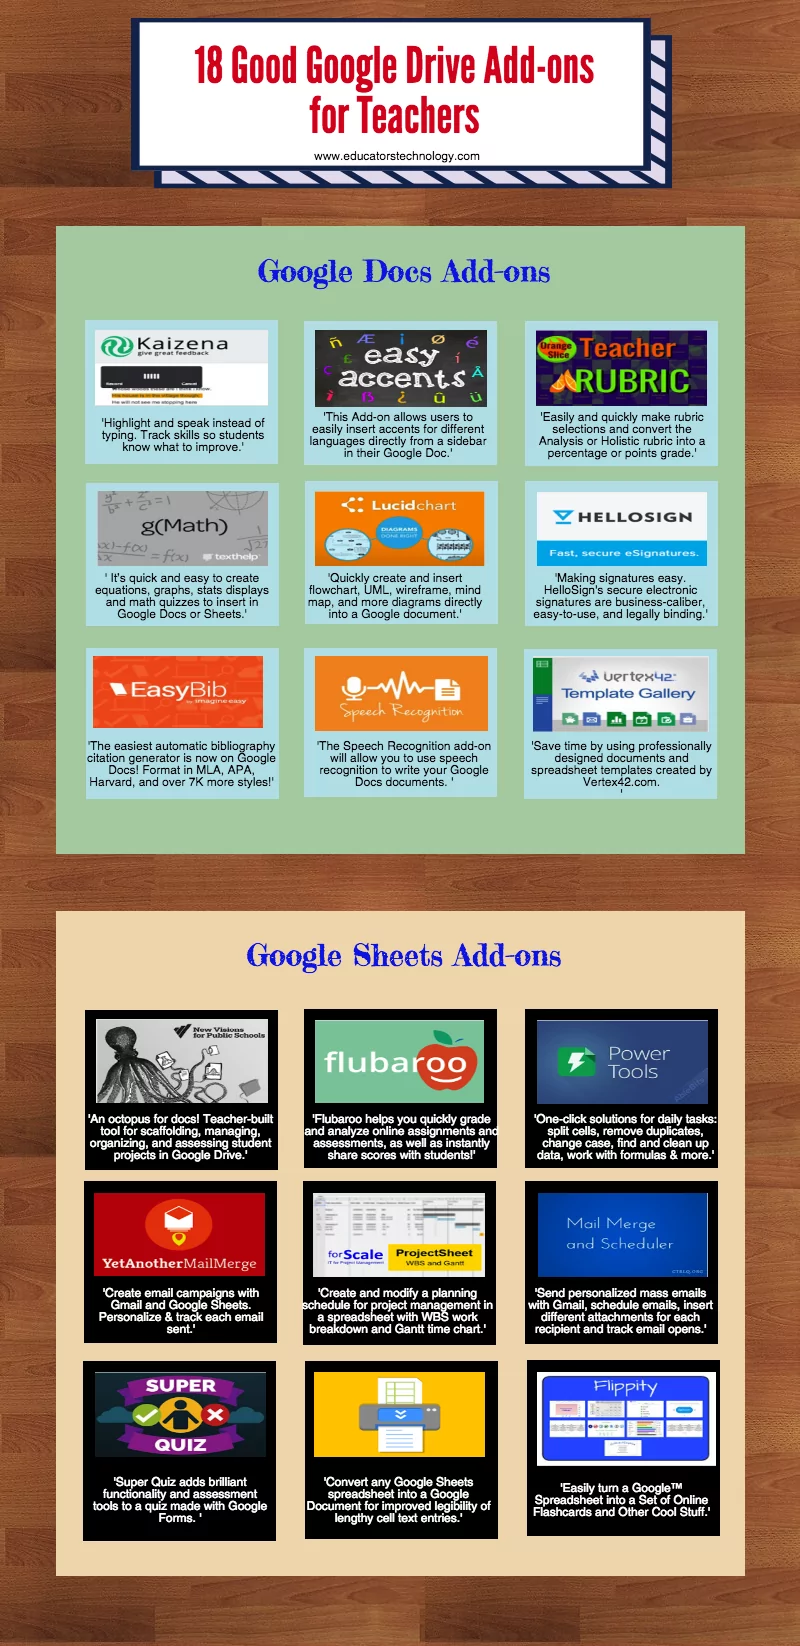 18 Good Google Drive Add-ons for Teaches